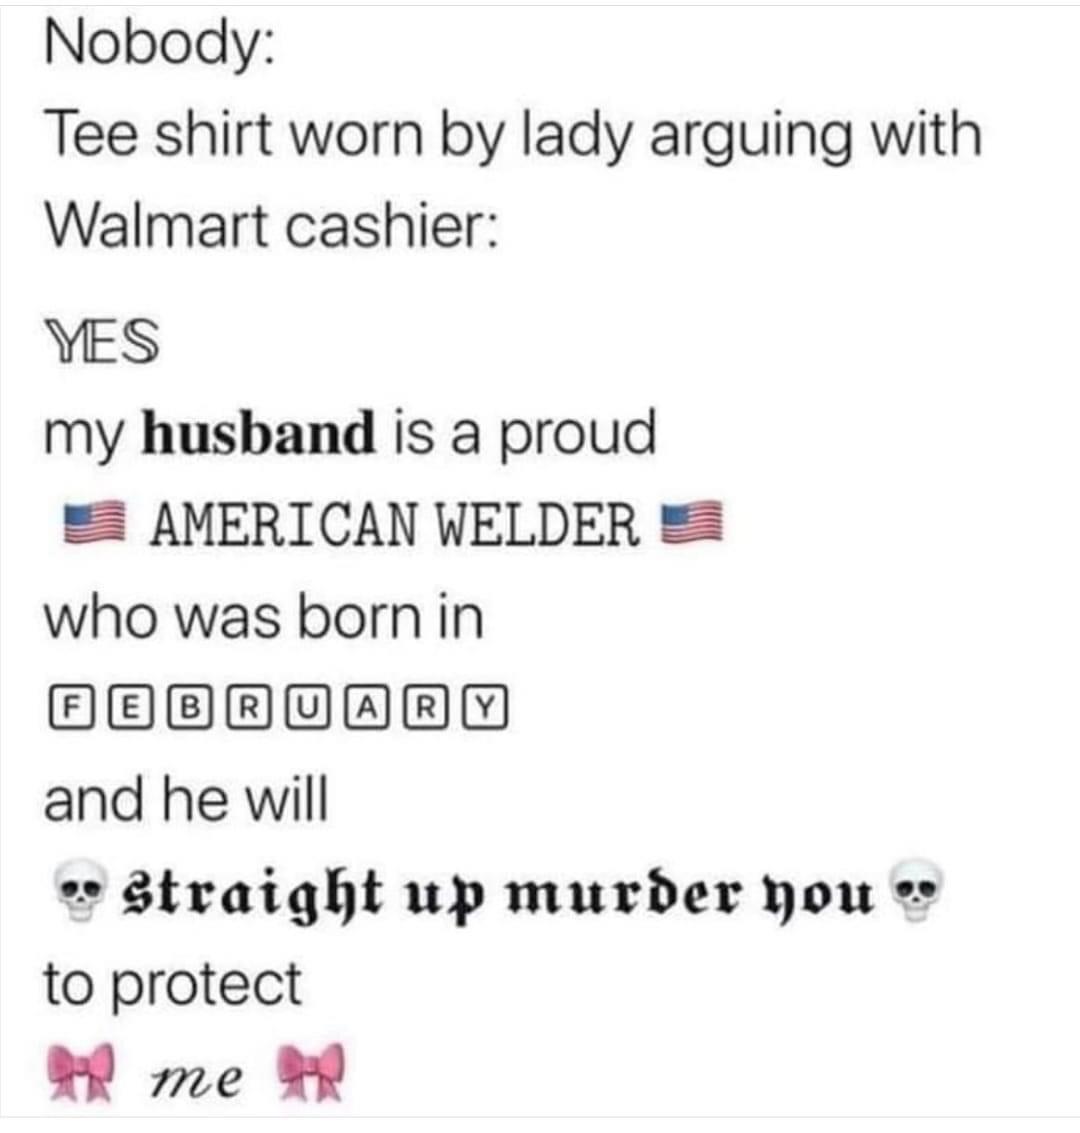 my husband is a proud american welder - Nobody Tee shirt worn by lady arguing with Walmart cashier Yes my husband is a proud American Welder who was born in @ and he will Straight up murder you to protect me Ary